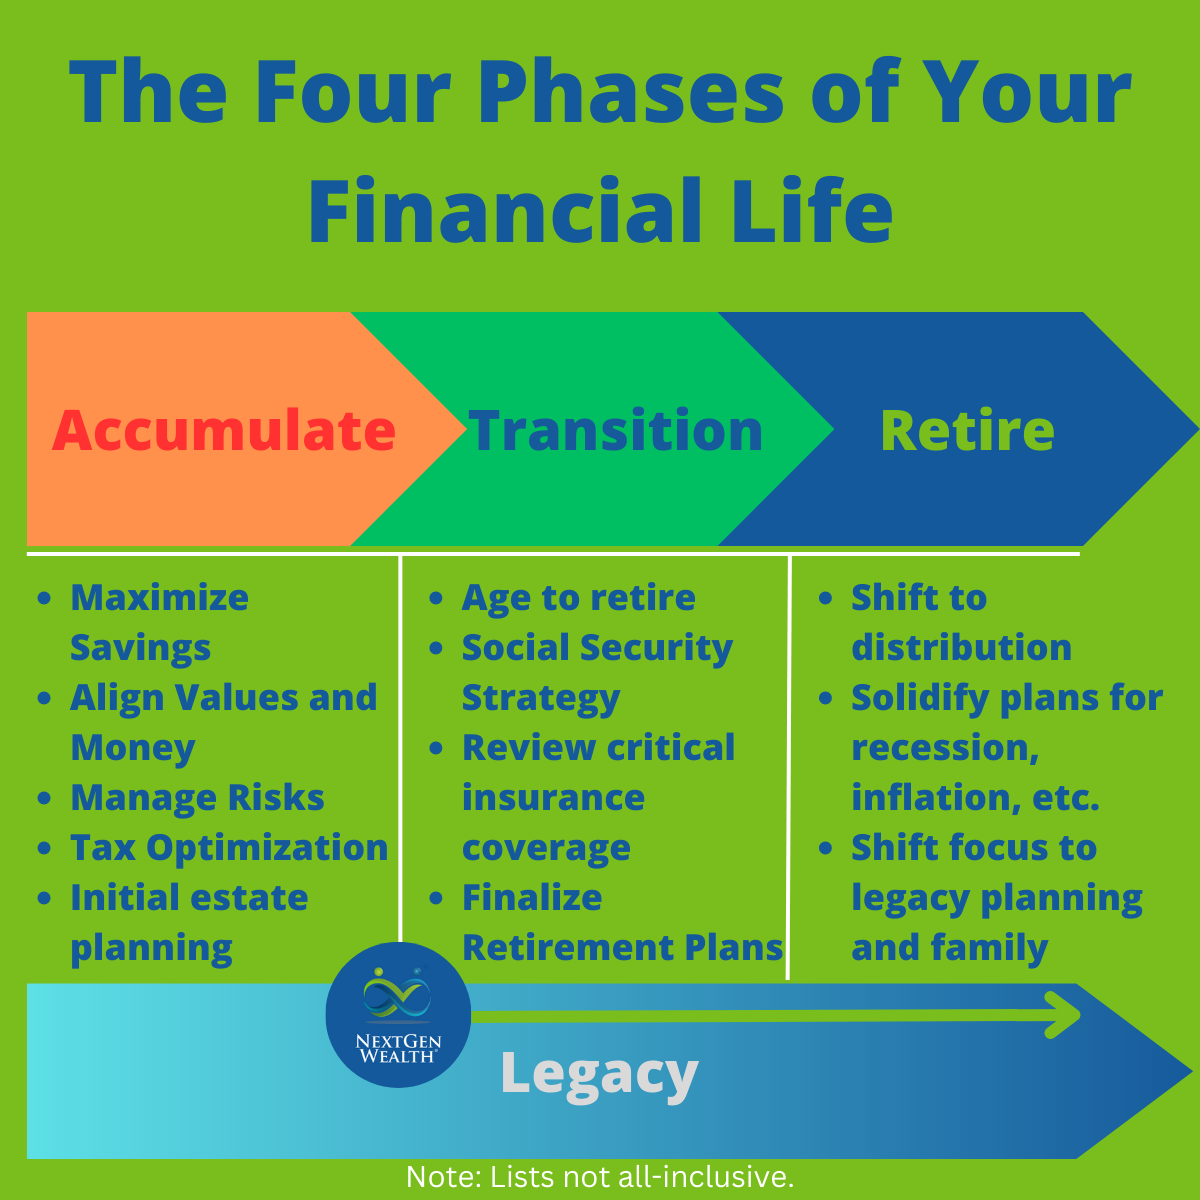 The Four Phases of Your Financial Life Flow Chart